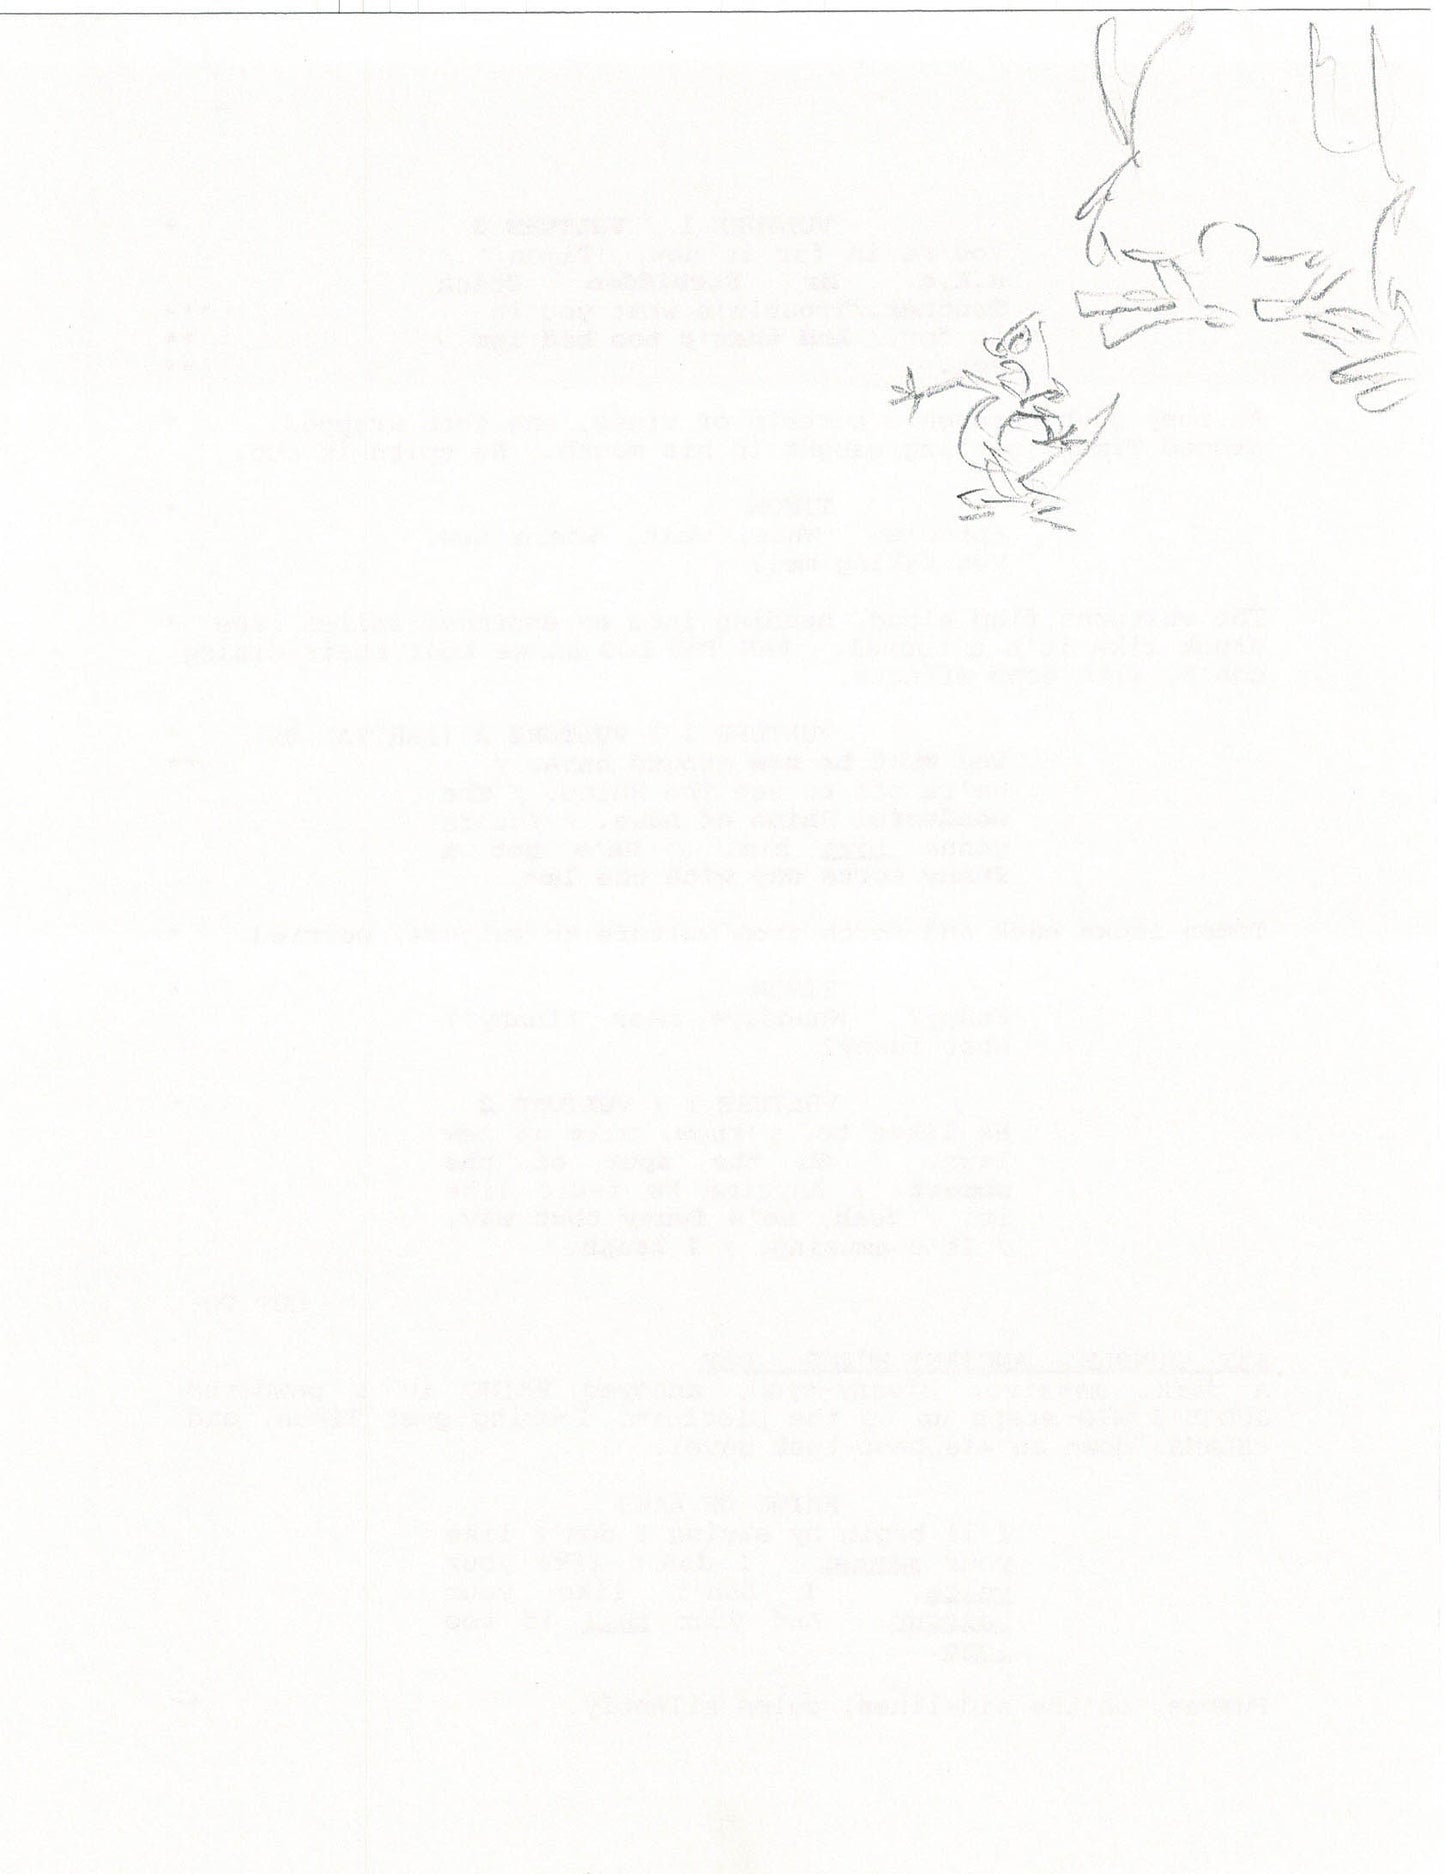 LION KING Timon n Pumbaa Disney Production Script Copy With Drawings from Animator Wendell Washer's Estate Episode 38 1995